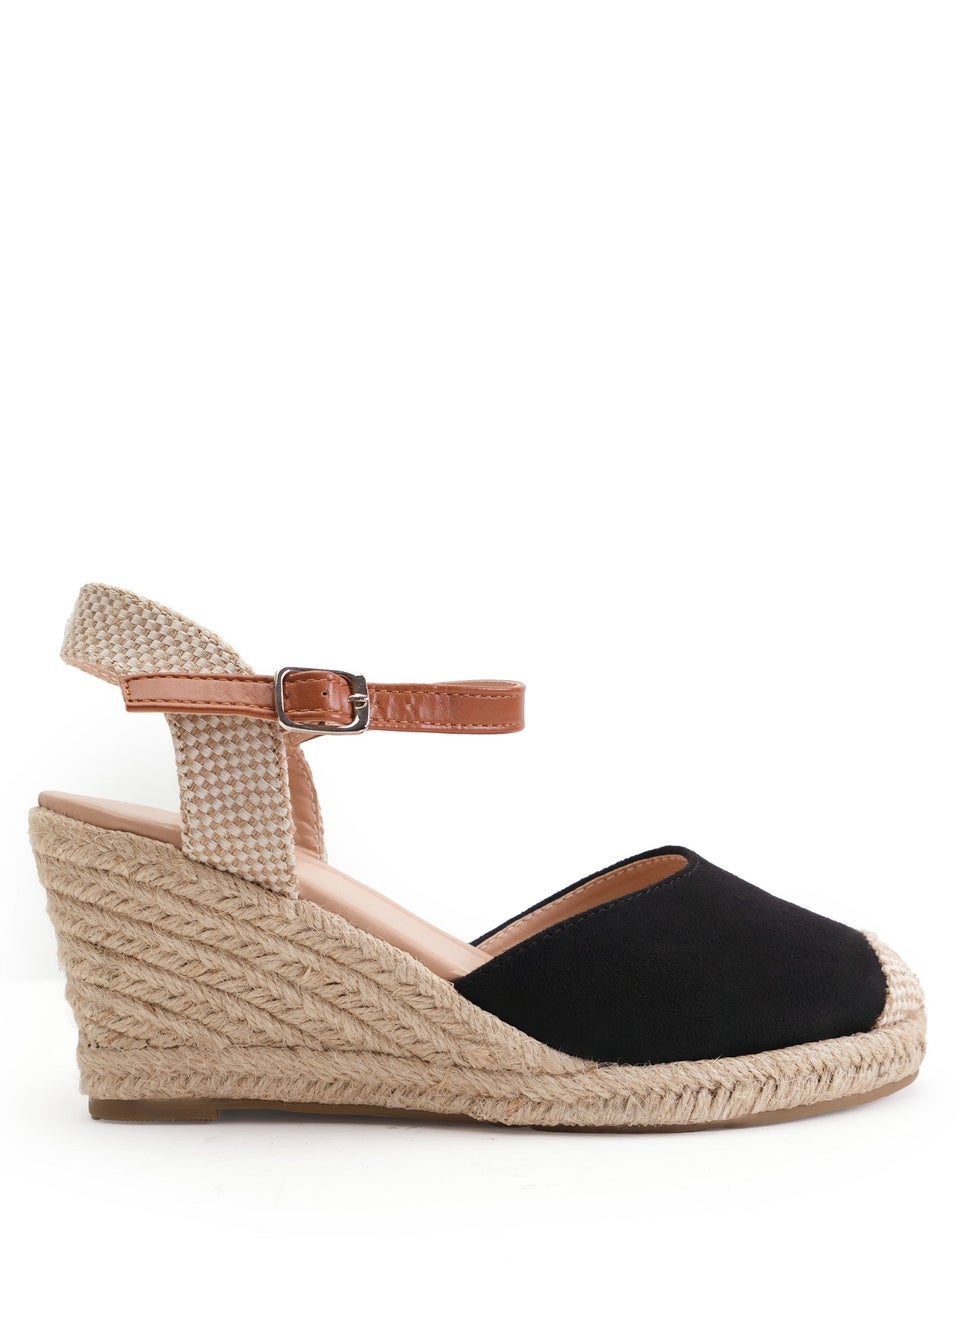 Where's That From Black Suede Blakely Low Wedge Espadrille Sandals